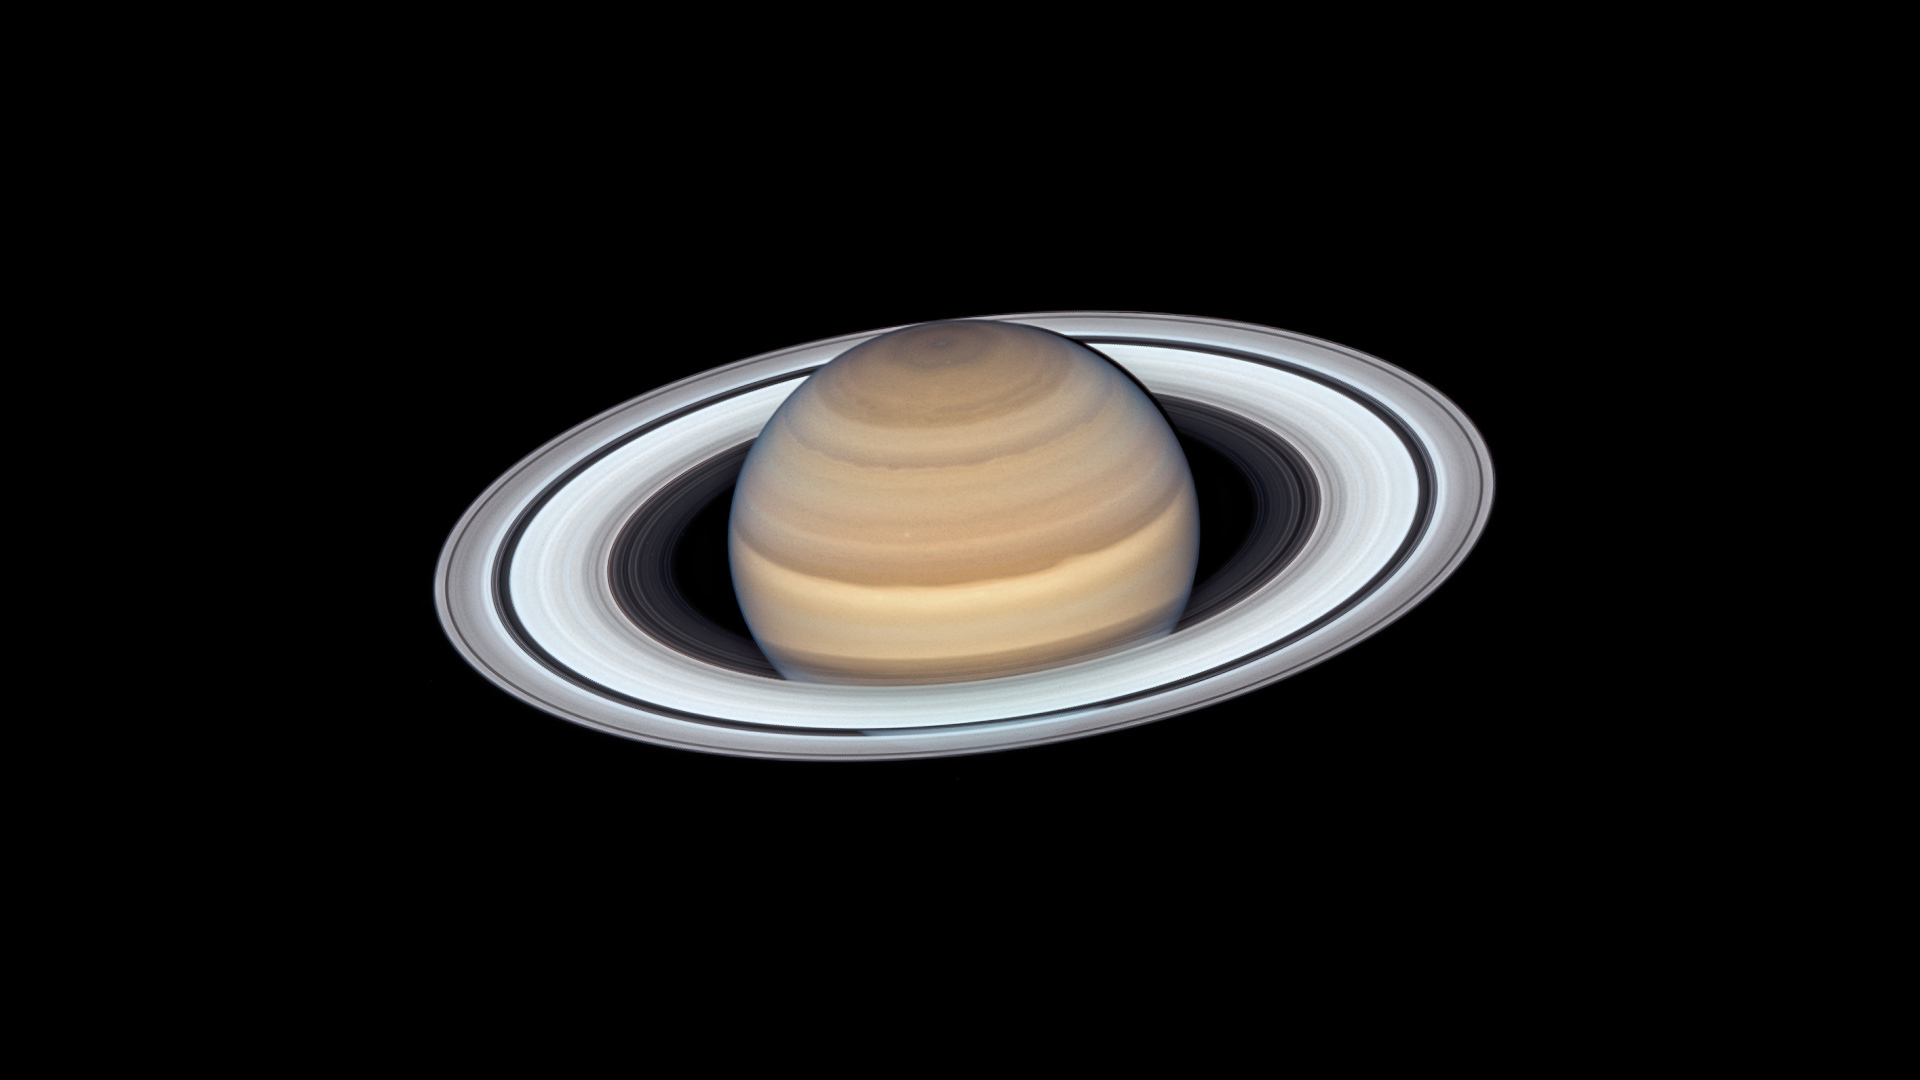 Saturn big planet with rings on a black background